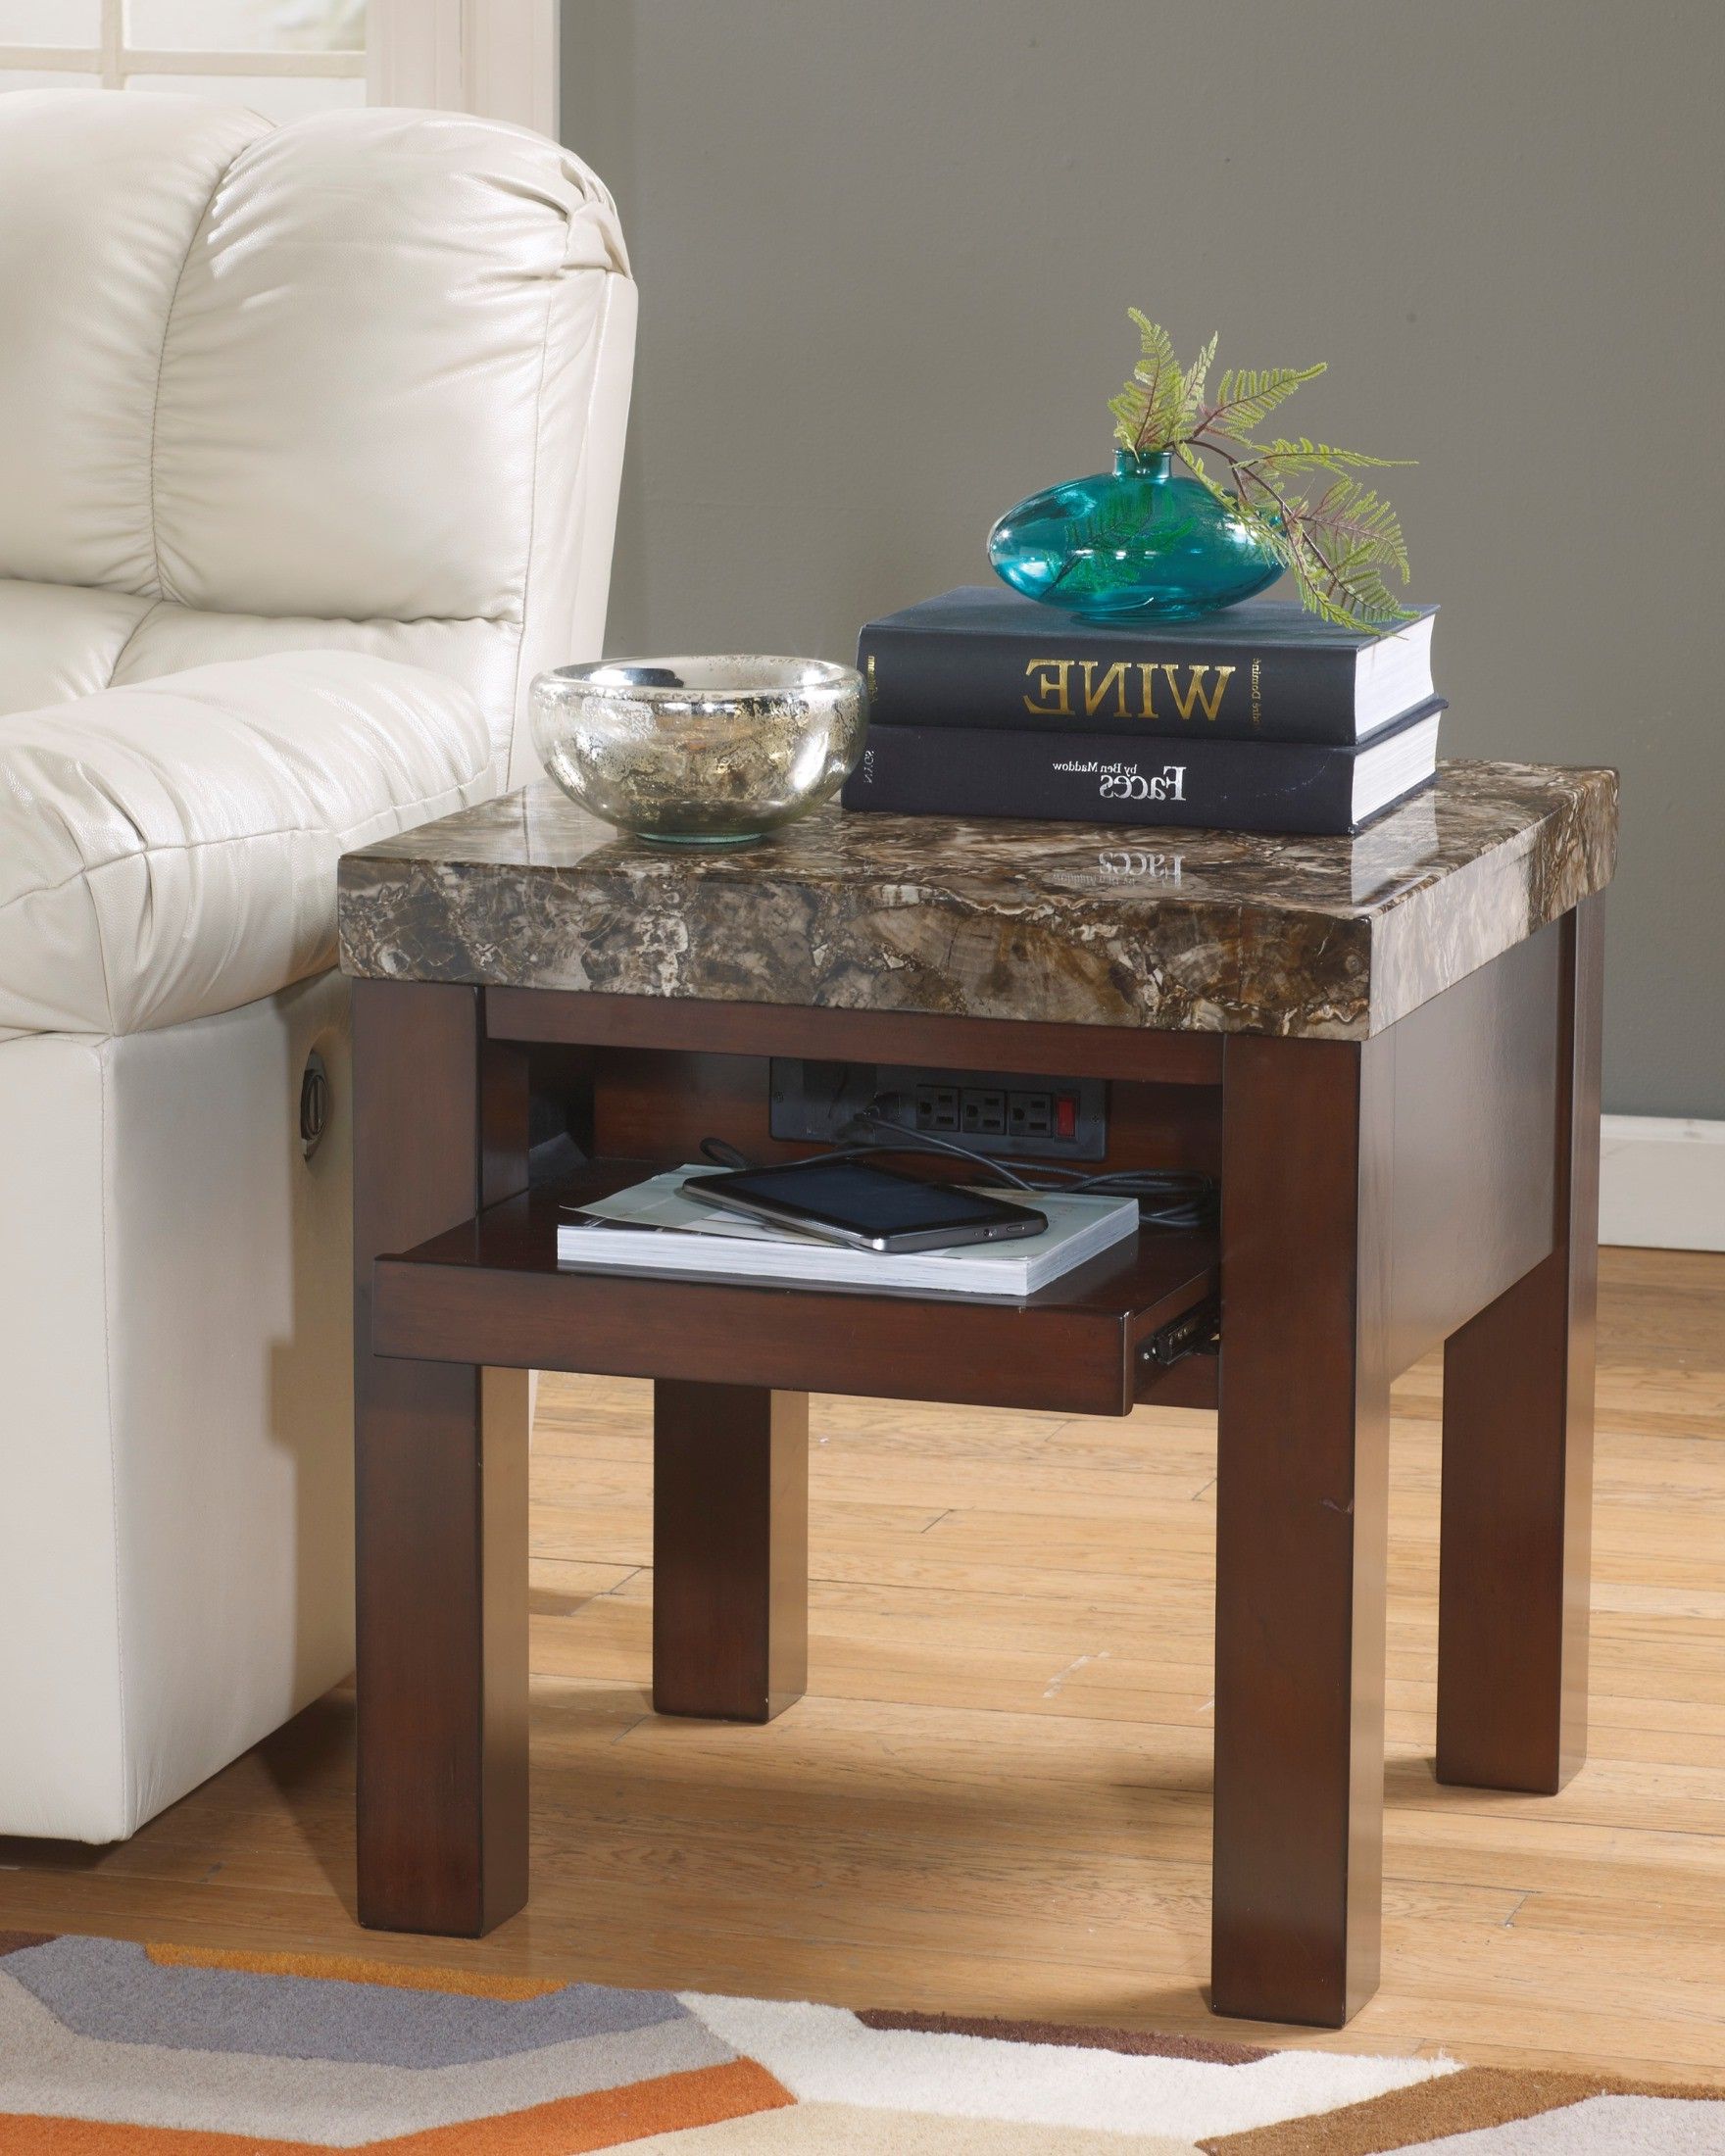 Widely Used Square Modern Accent Tables Regarding Kraleene Square End Table From Ashley (t687 2) (View 2 of 20)